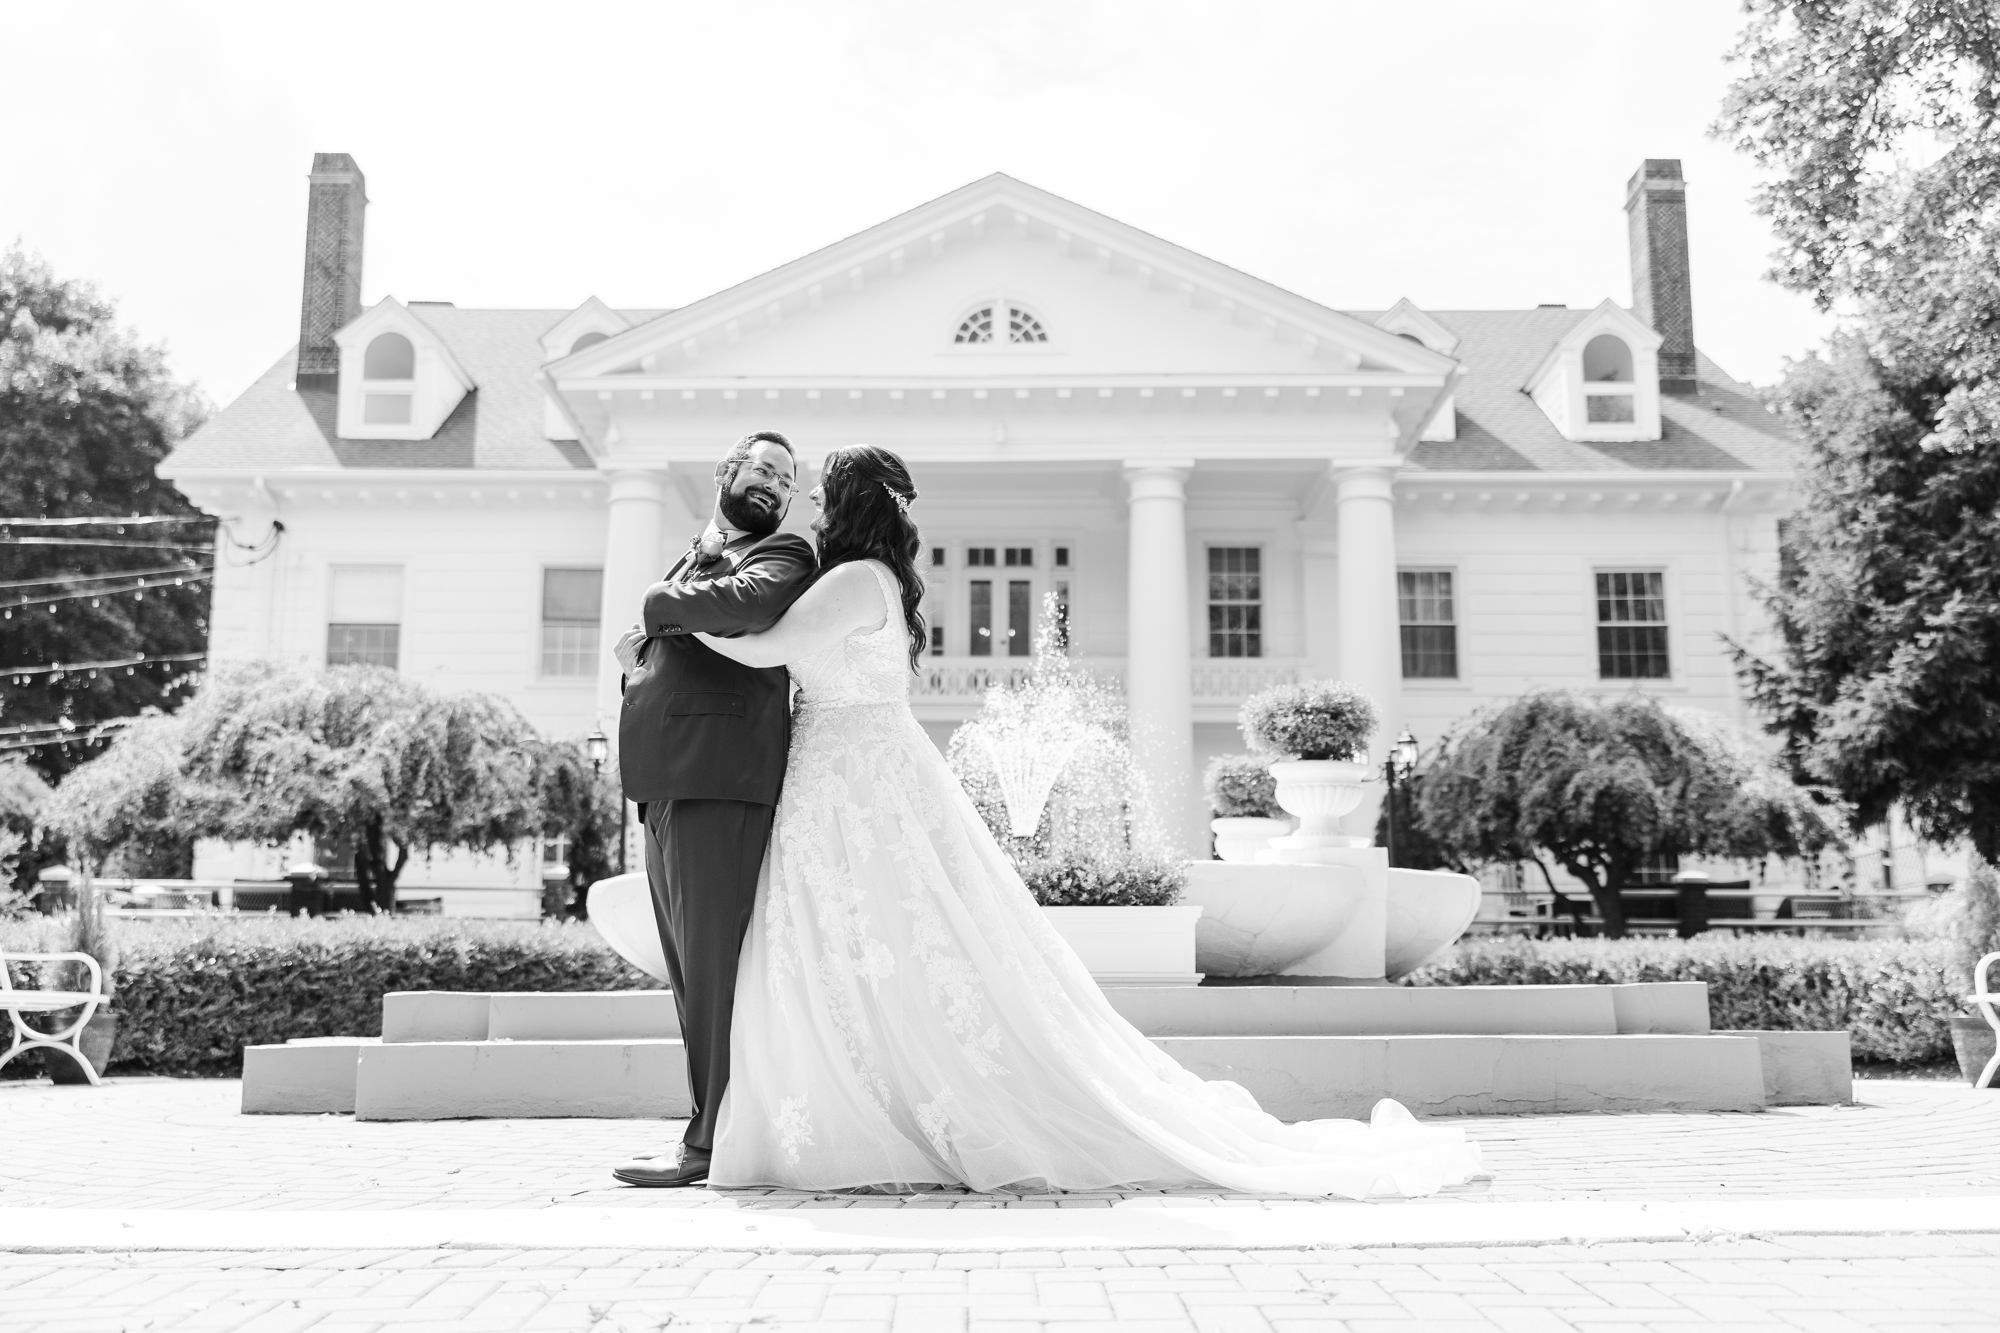 Cheerful Wedding at Briarcliff Manor in New York